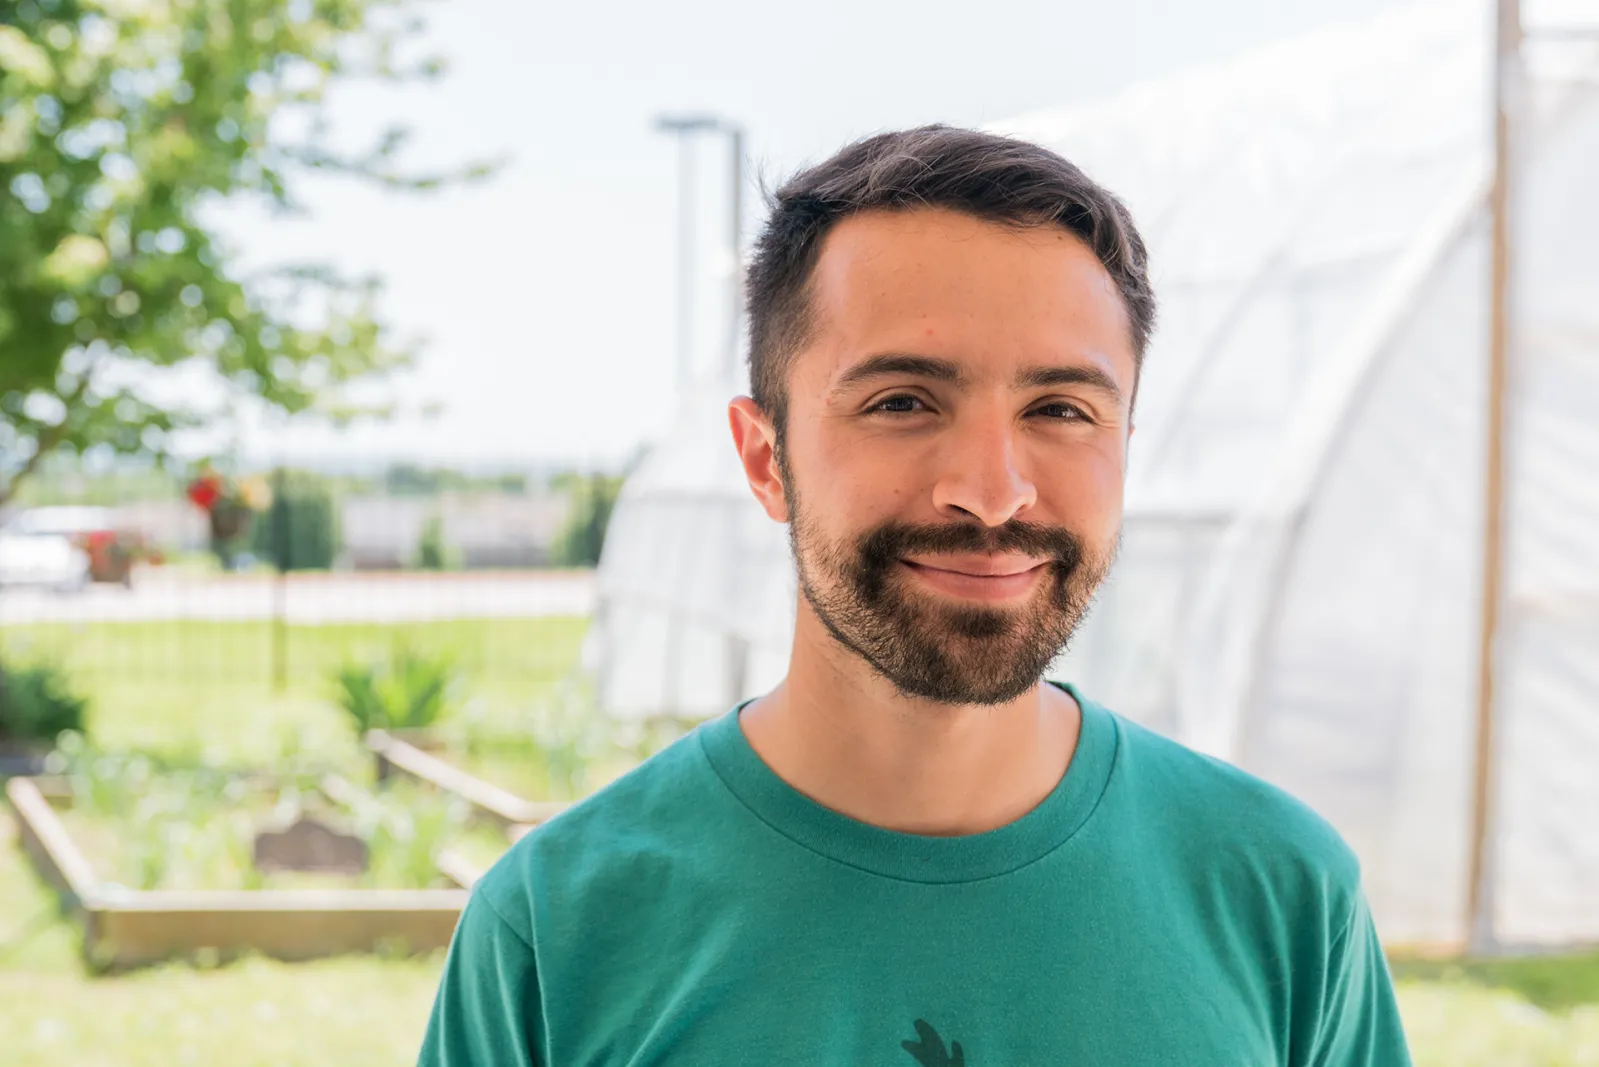 Handsome Hispanic man with beard and short hair, with greenhouse in background